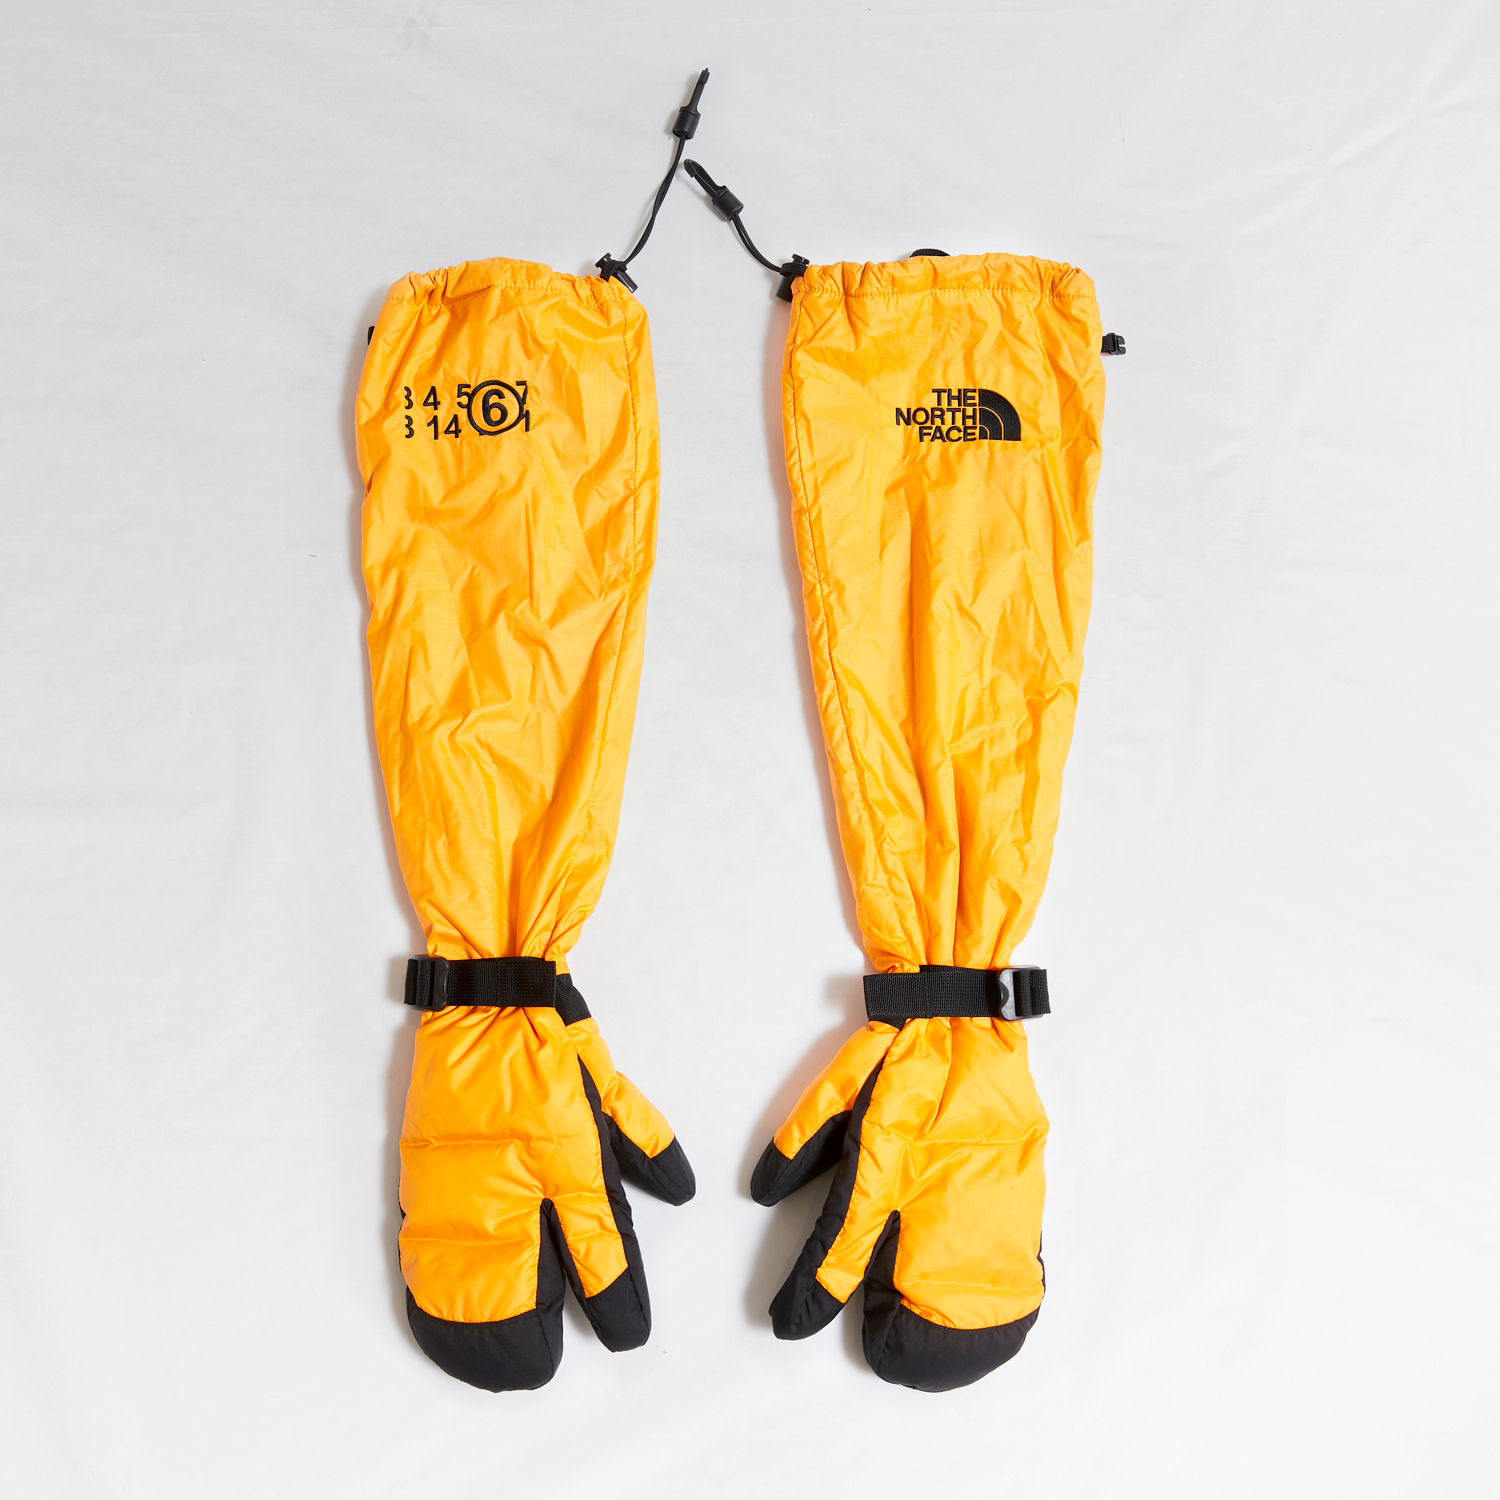 Tabi Expedition Gloves, $504